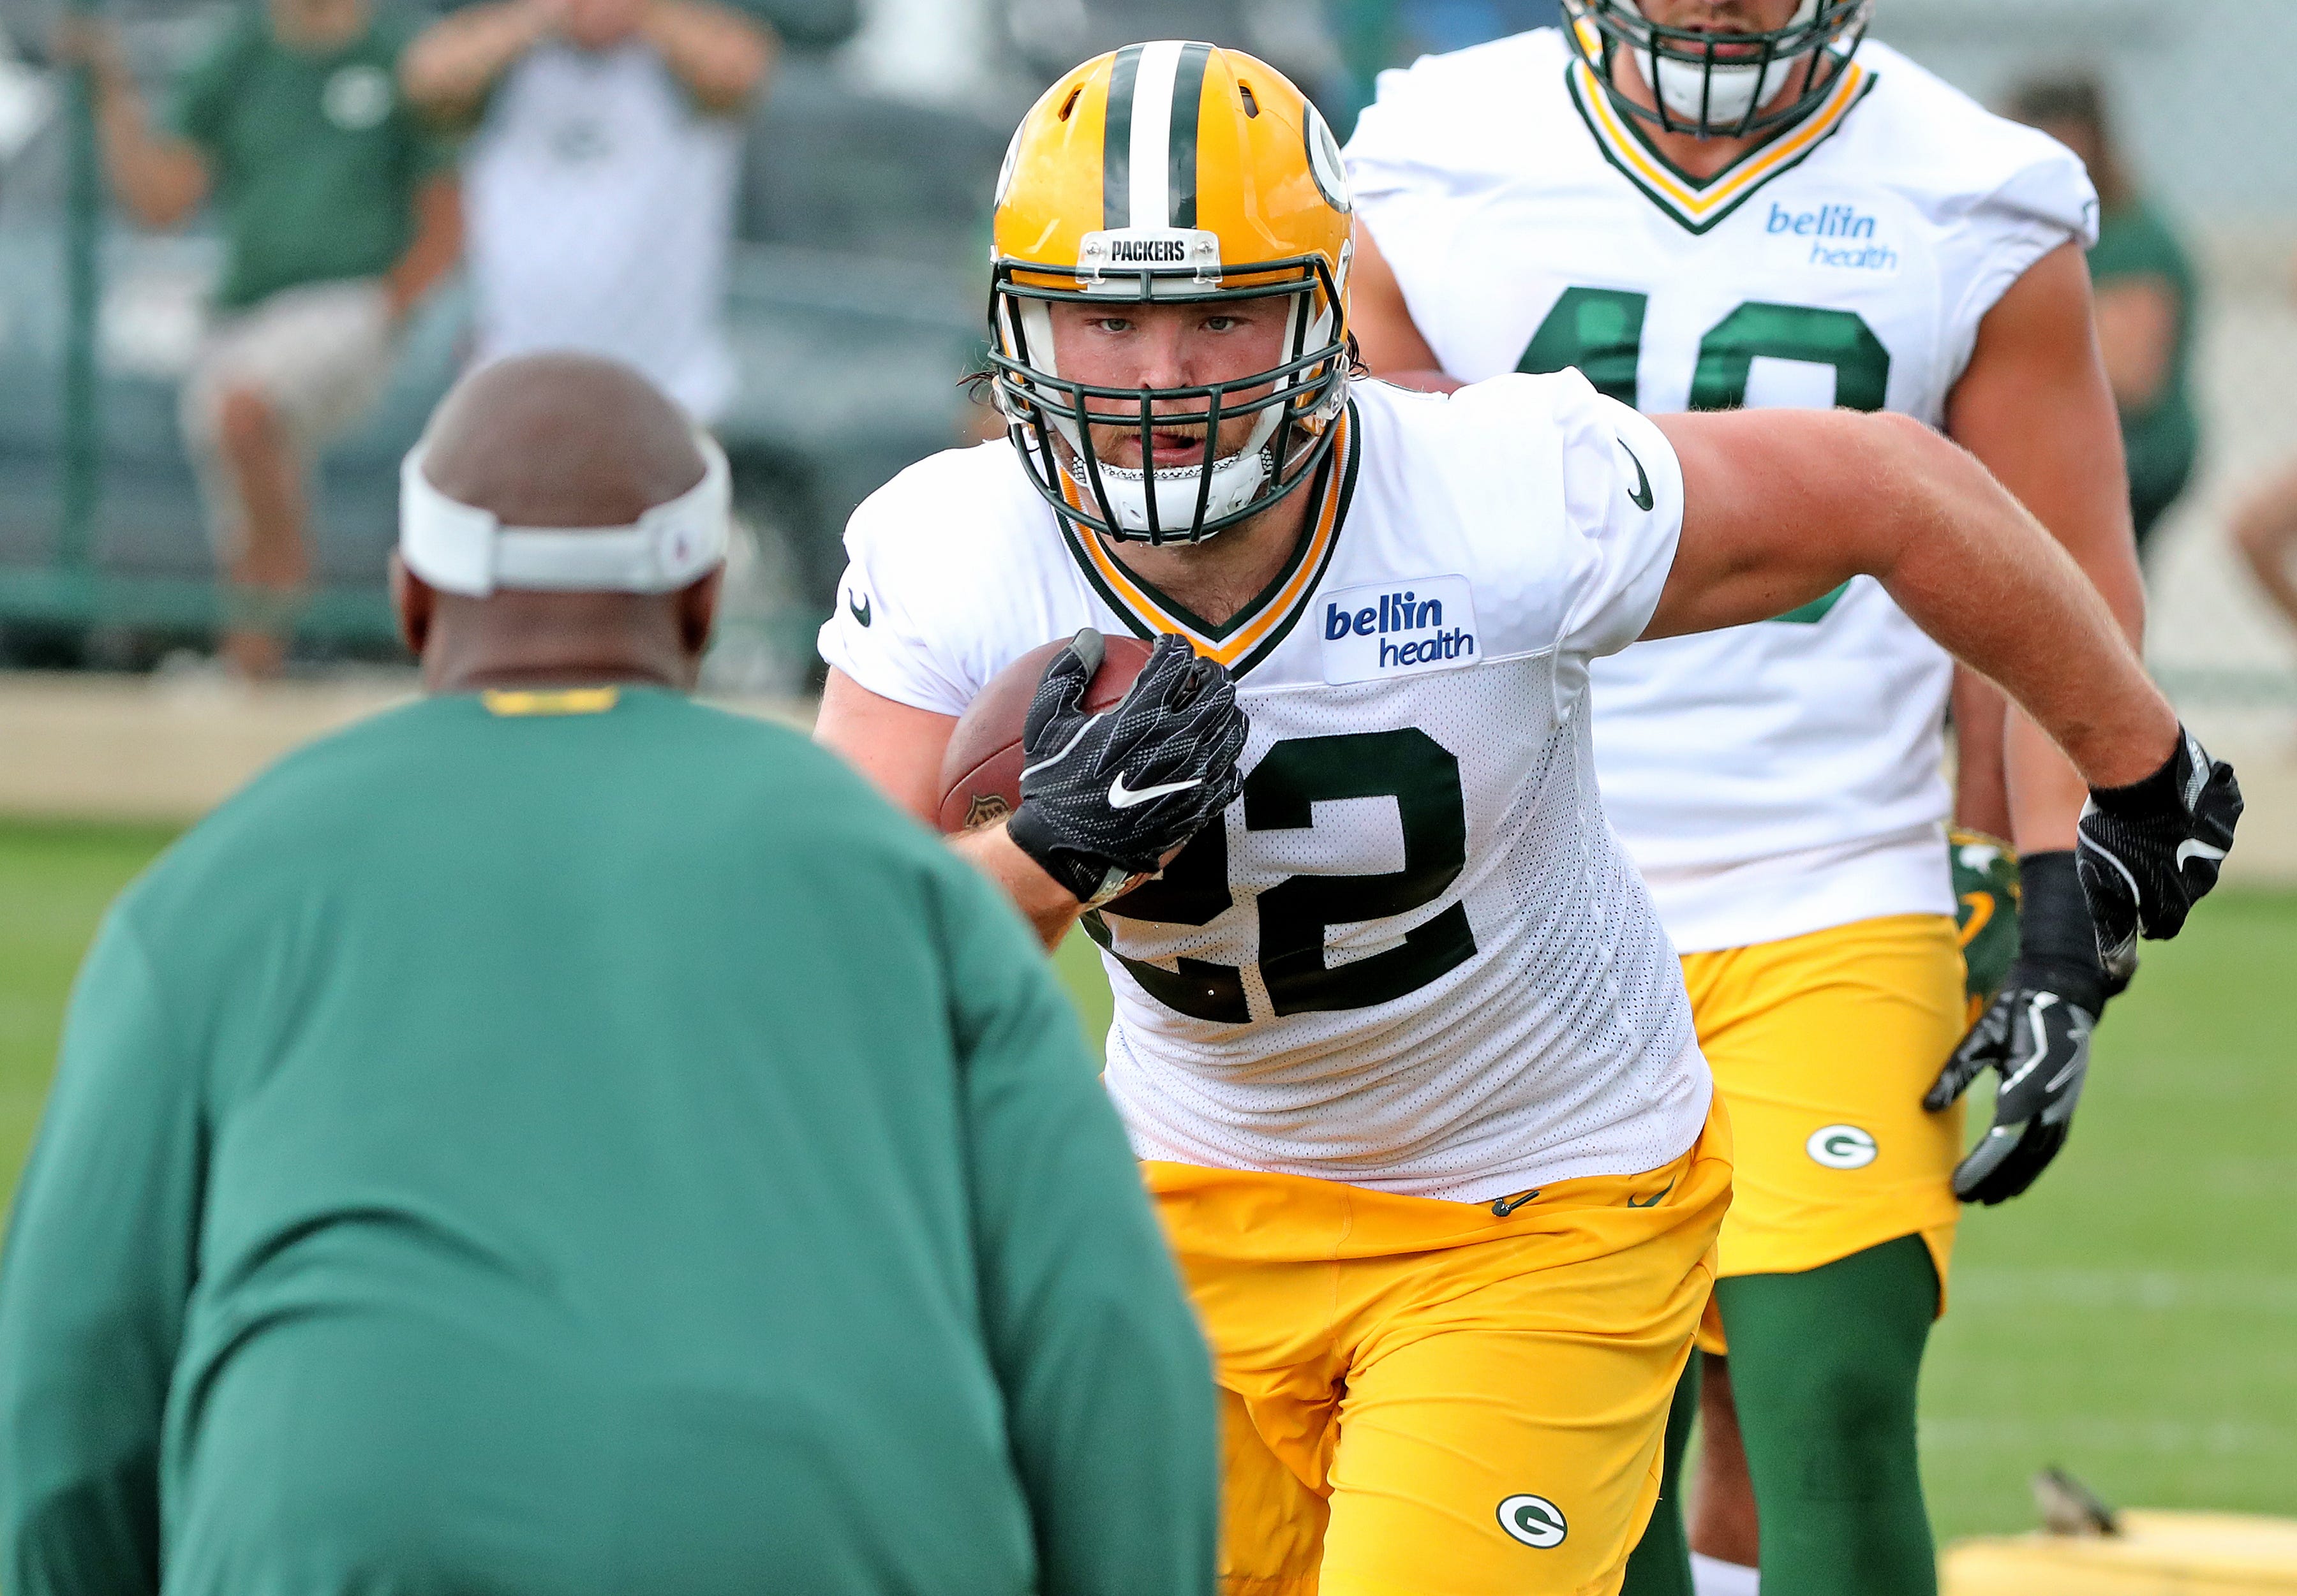 No fullback? Aaron Ripkowski most surprising cutdown casualty for Packers